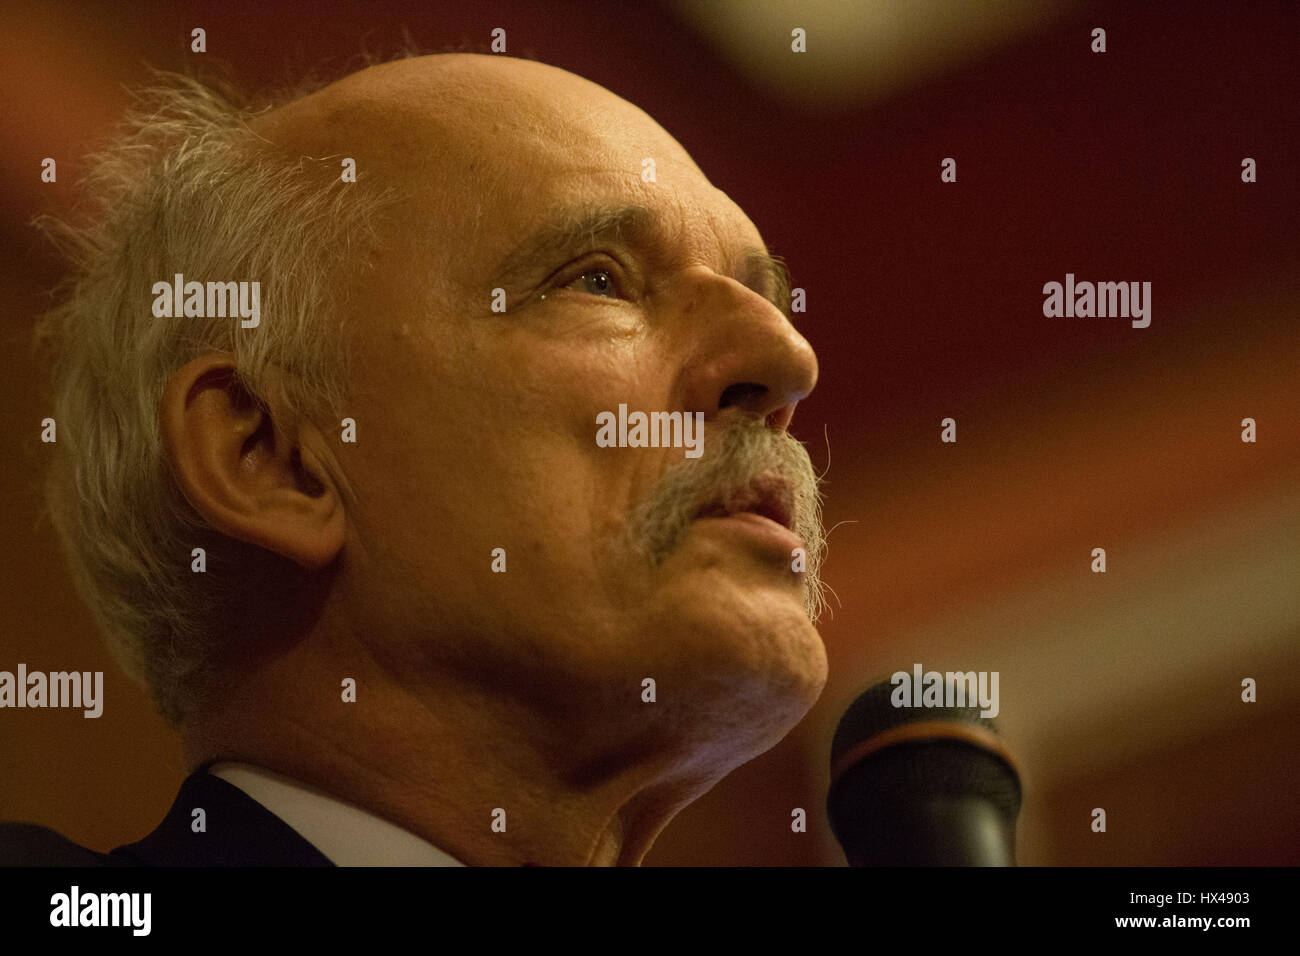 Bydgoszcz, Poland. 24th Mar, 2017. Bydgoszcz, Poland. March 25th, 2017. Janusz Korwin-Mikke, member of European Parliament and leader of the Polish right wing Eurosceptic KORWiN party is seen at a talk in hotel Pod Orlem. Mister Korwin-Mikke is currently suspended as MEP for his misogynist remarks during a debate on March 1st on gender pay equality. Credit: Jaap Arriens/Alamy Live News Stock Photo